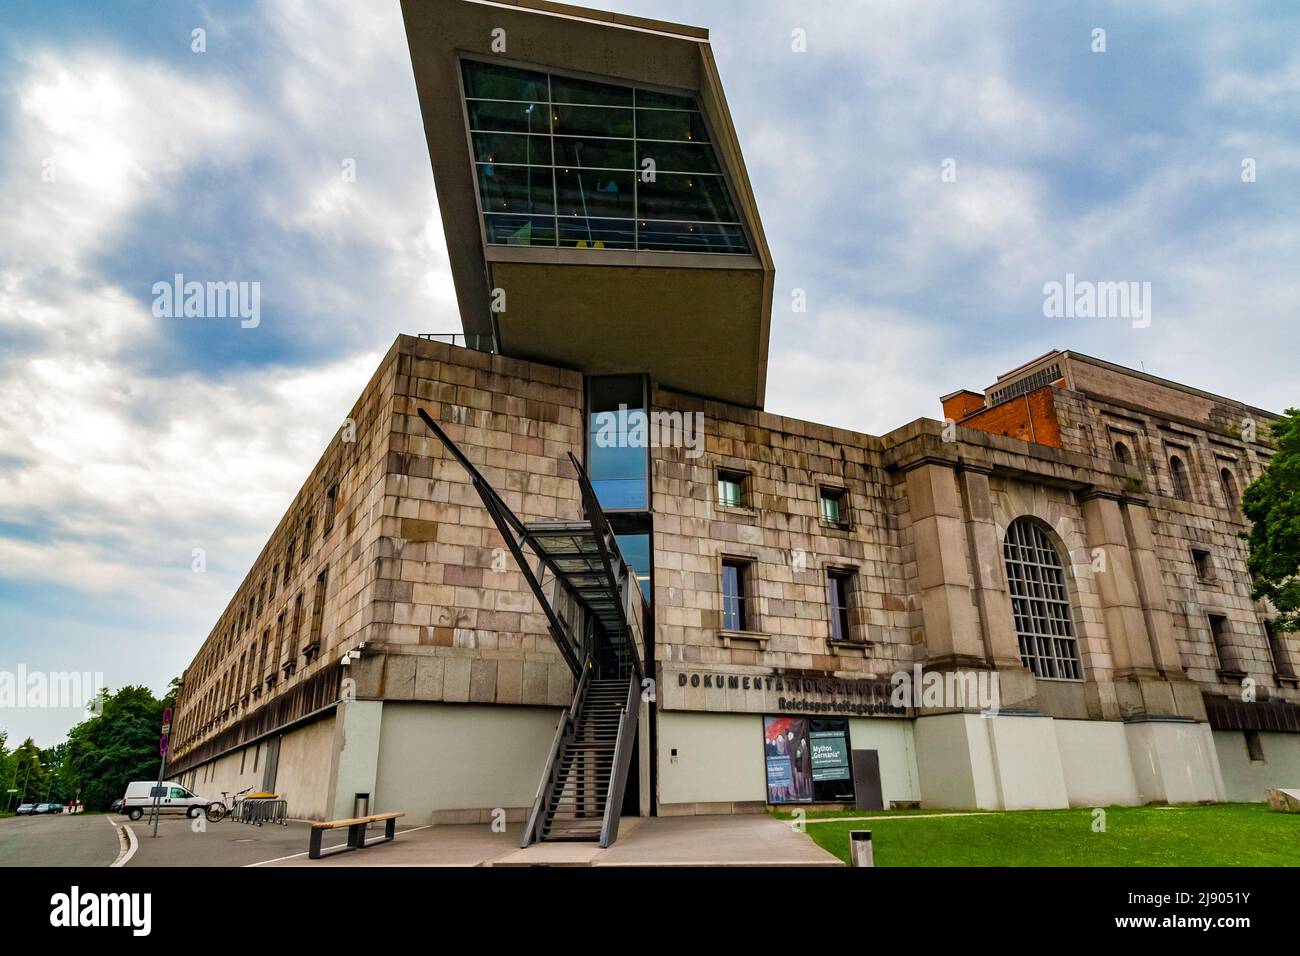 The Documentation Center with its glass and steel like arrow piercing the north wing of the unfinished remains of the Congress Hall of the former Nazi... Stock Photo